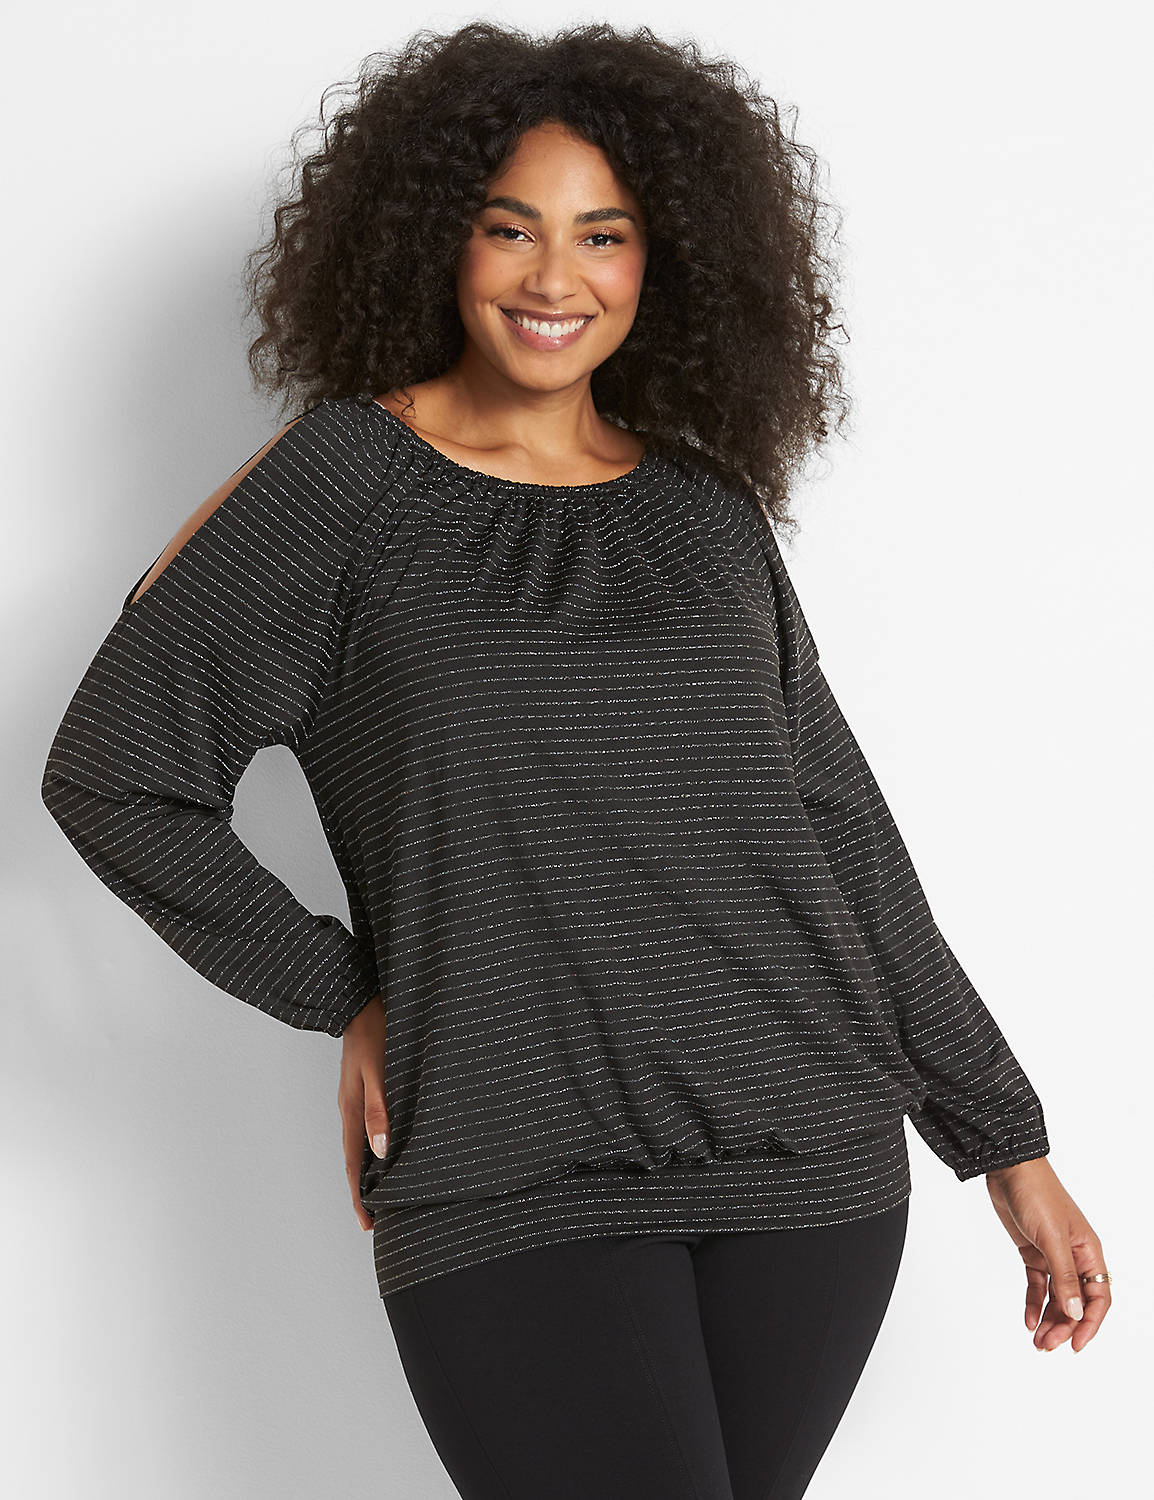 Long Sleeve With Cutout Deep Boat Neck Knit Top 1124636:Black:10/12 Product Image 1